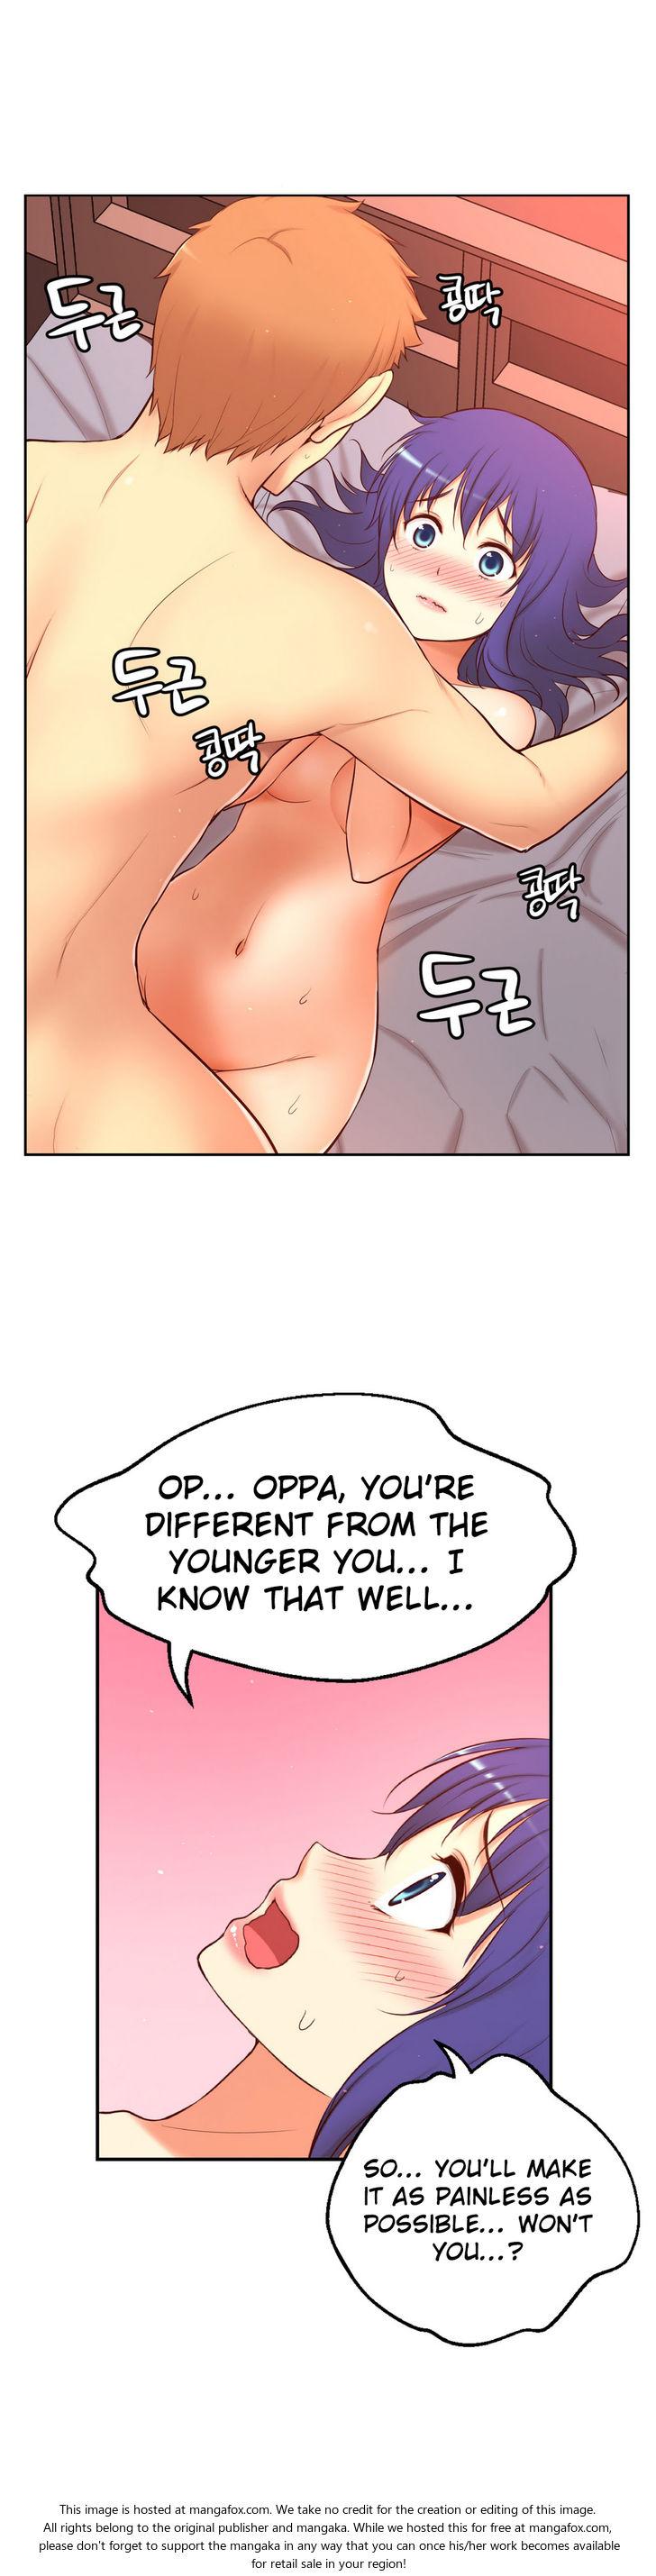 [Donggul Gom] She is Young (English) Part 1/2 1837